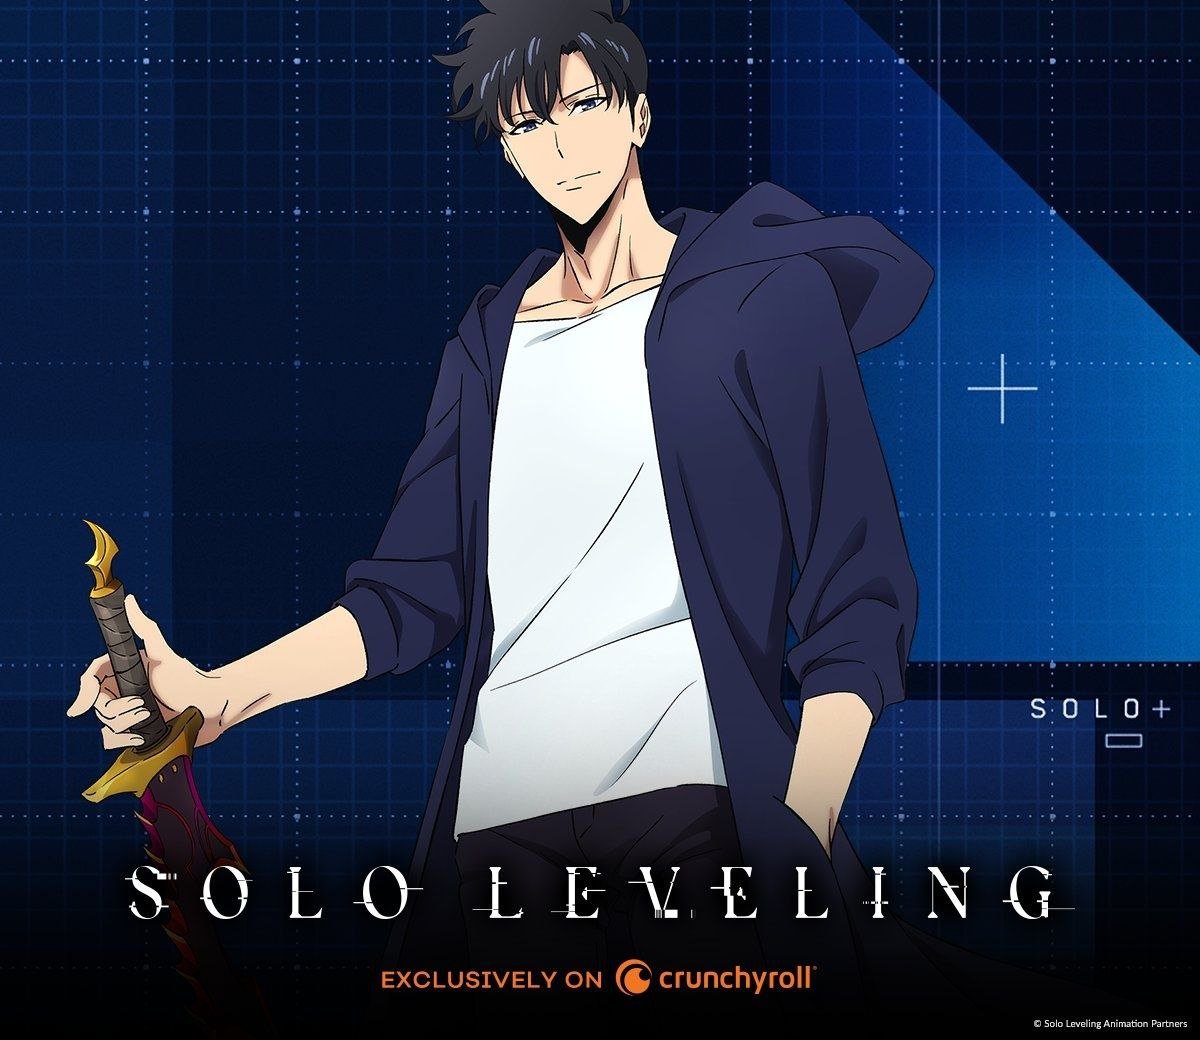 Solo Leveling Episode 1 Images Released